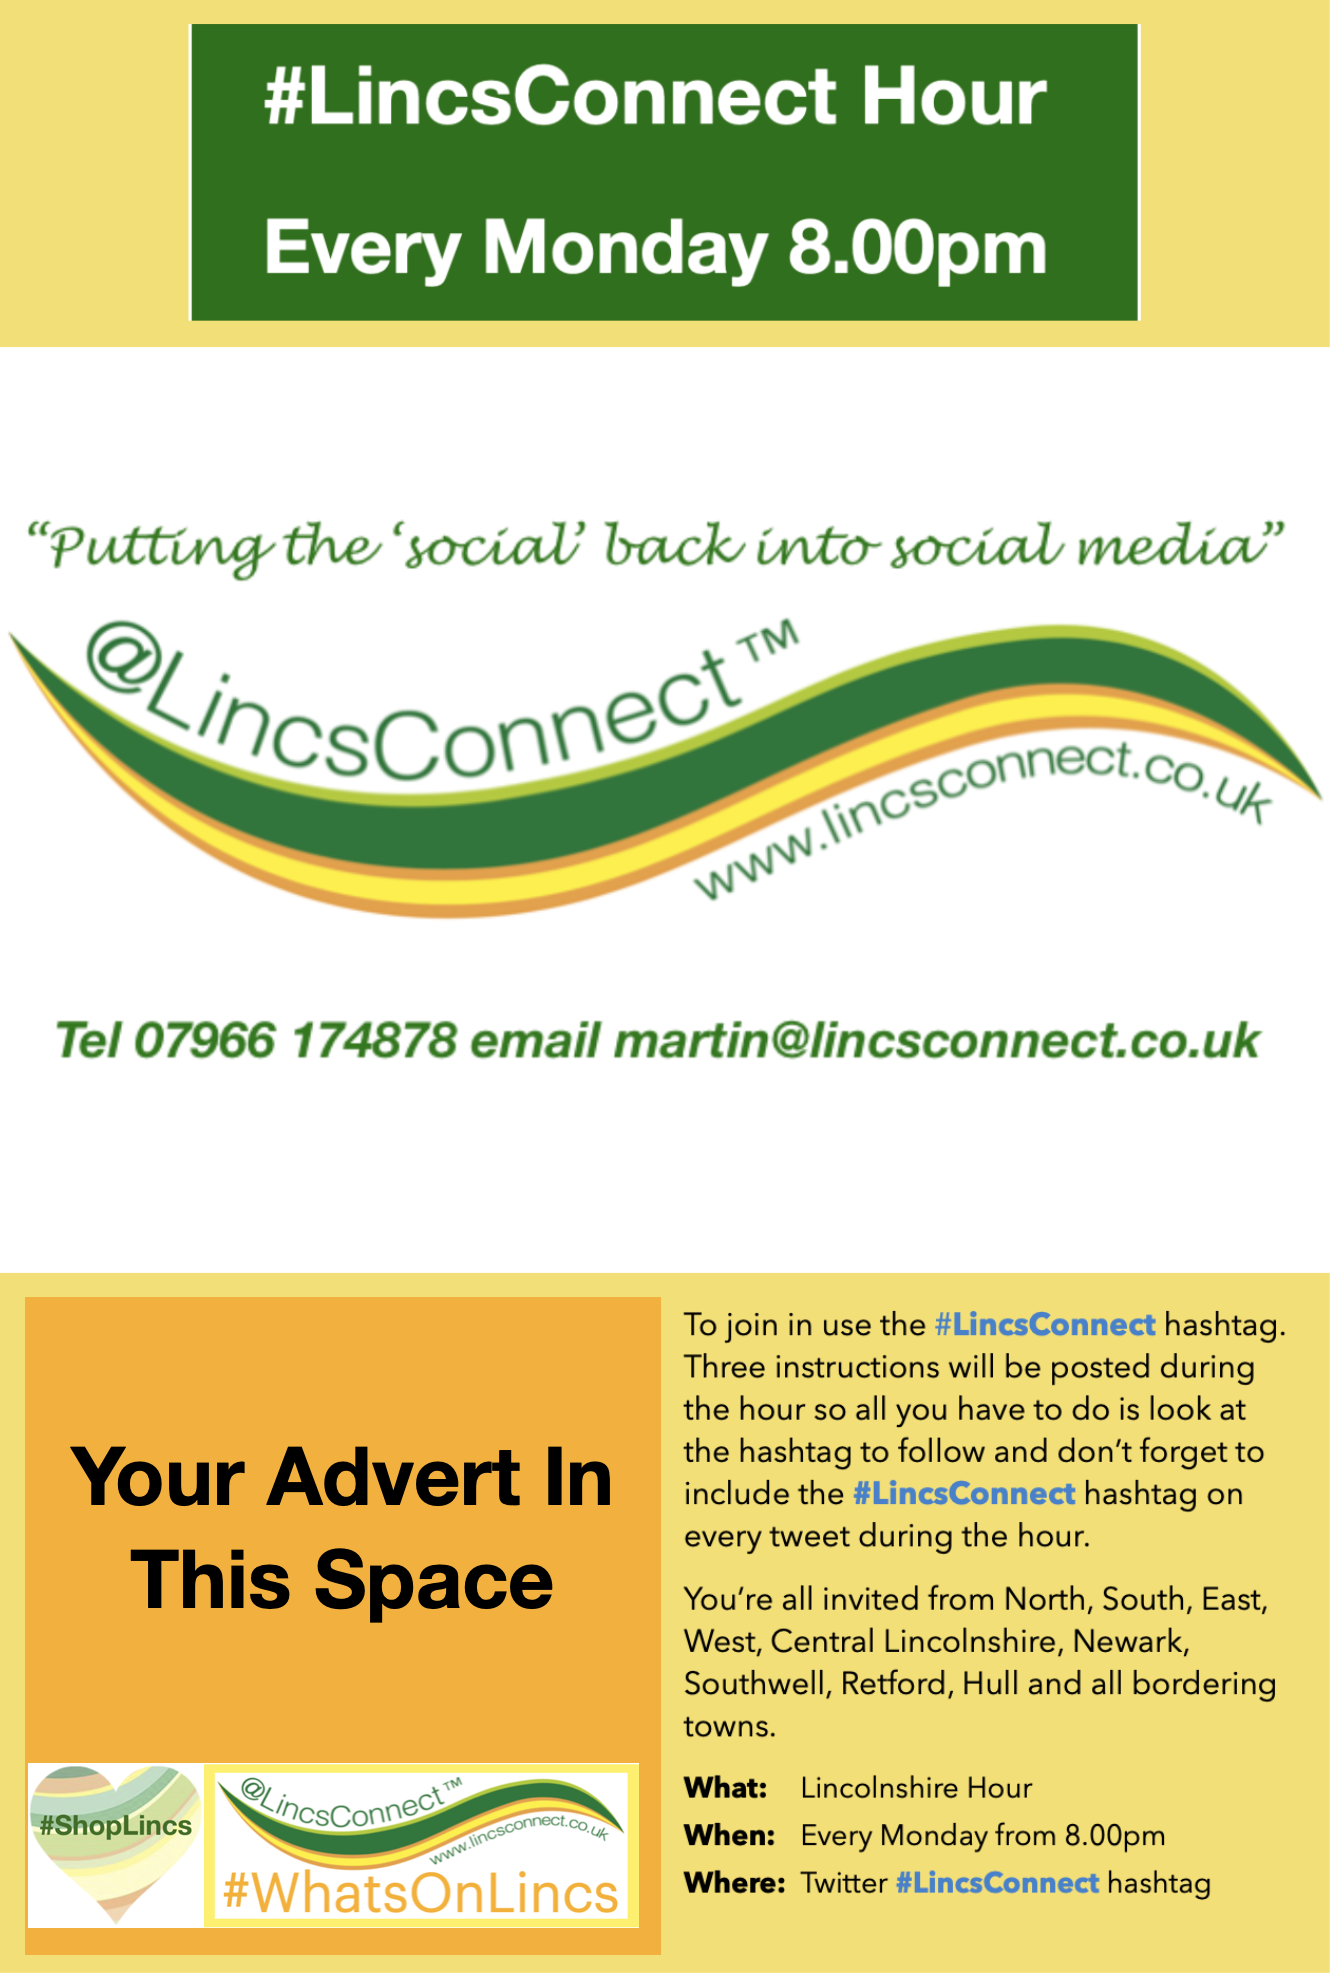 #LincsConnect Hour on Monday evenings is a great way to advertise locally, nationally and globally. By LincsConnect, the Lincolnshire blogger LincsBlogger